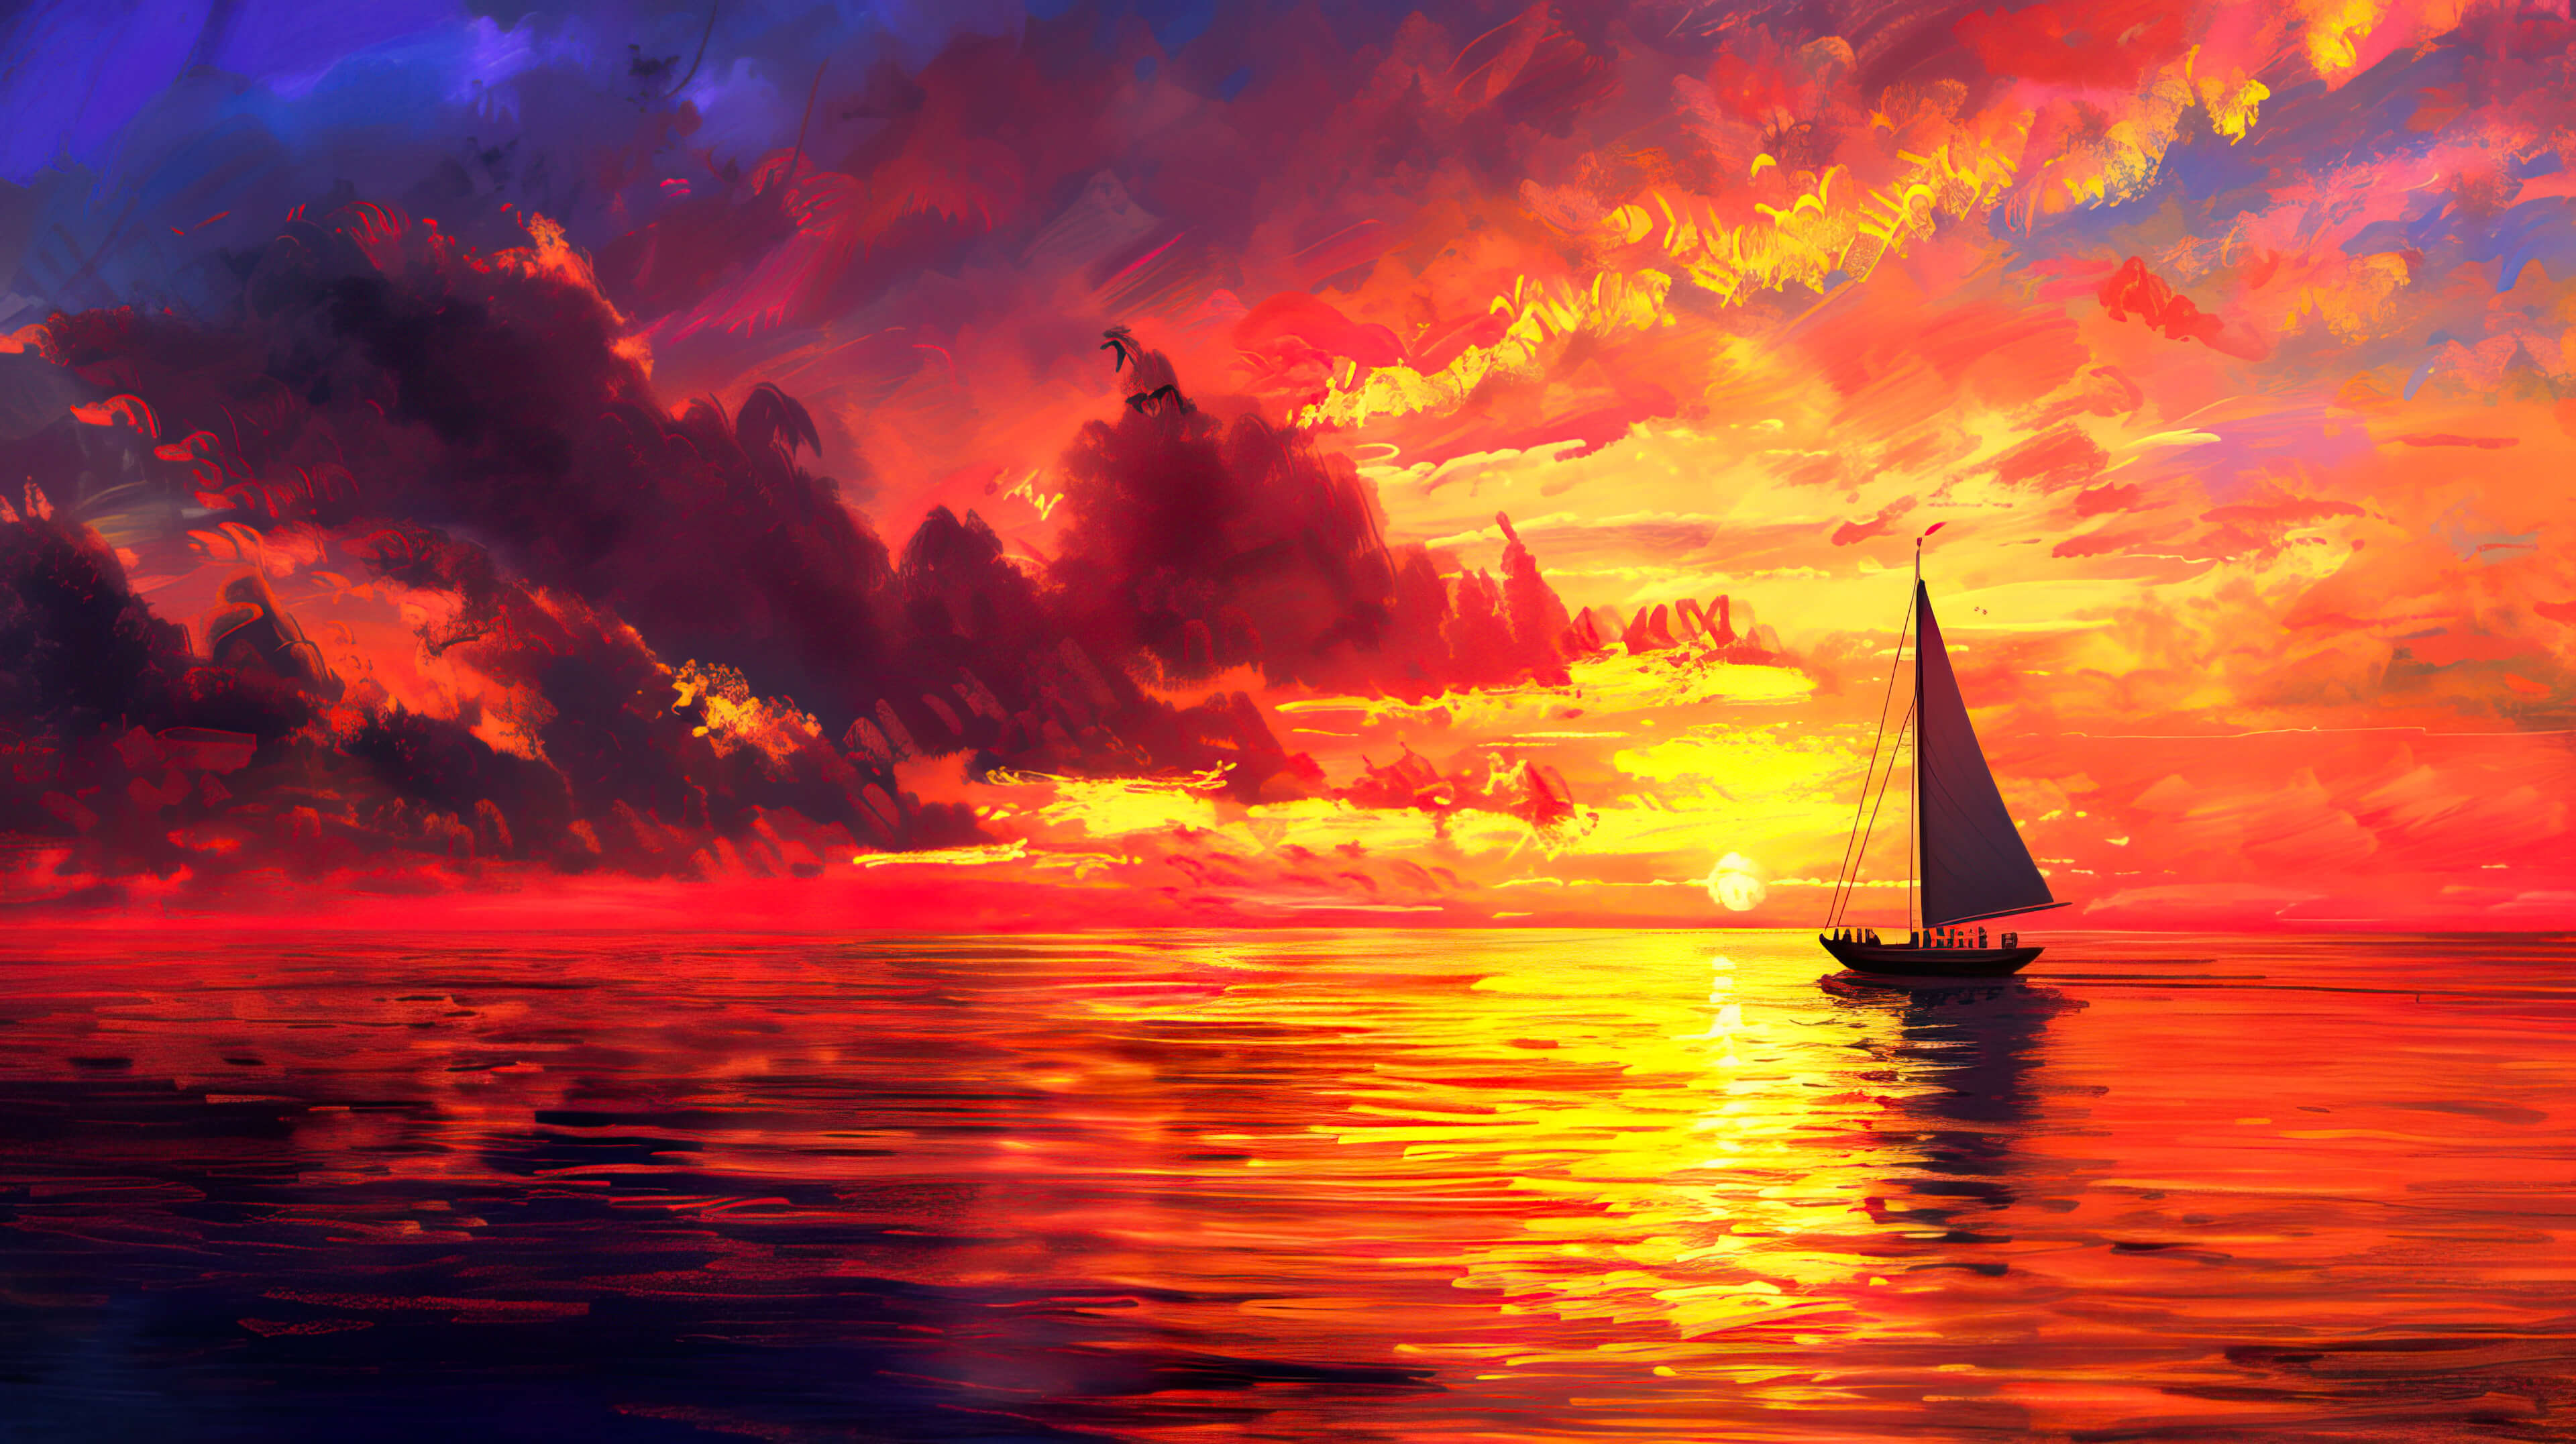 A sailboats silhouette stands out against the fiery orange and pink hues reflecting over the ocean in this captivating ocean sunset wallpaper